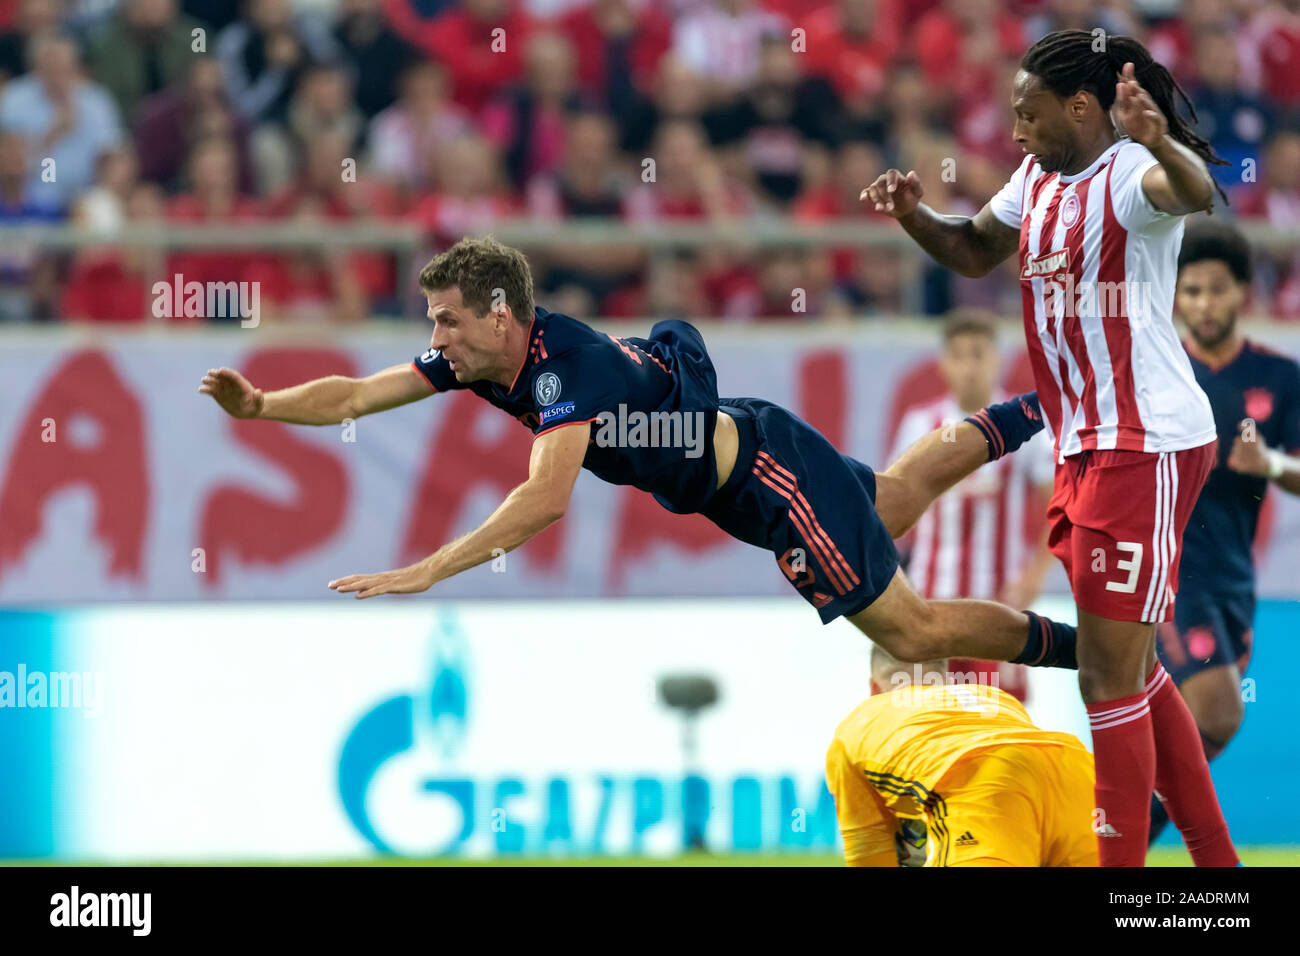 Piraeus, Greece - October 22, 2019: Player of Bayern Thomas Muller(L) in action during the UEFA Champions League game between Olympiacos vs Bayern at Stock Photo